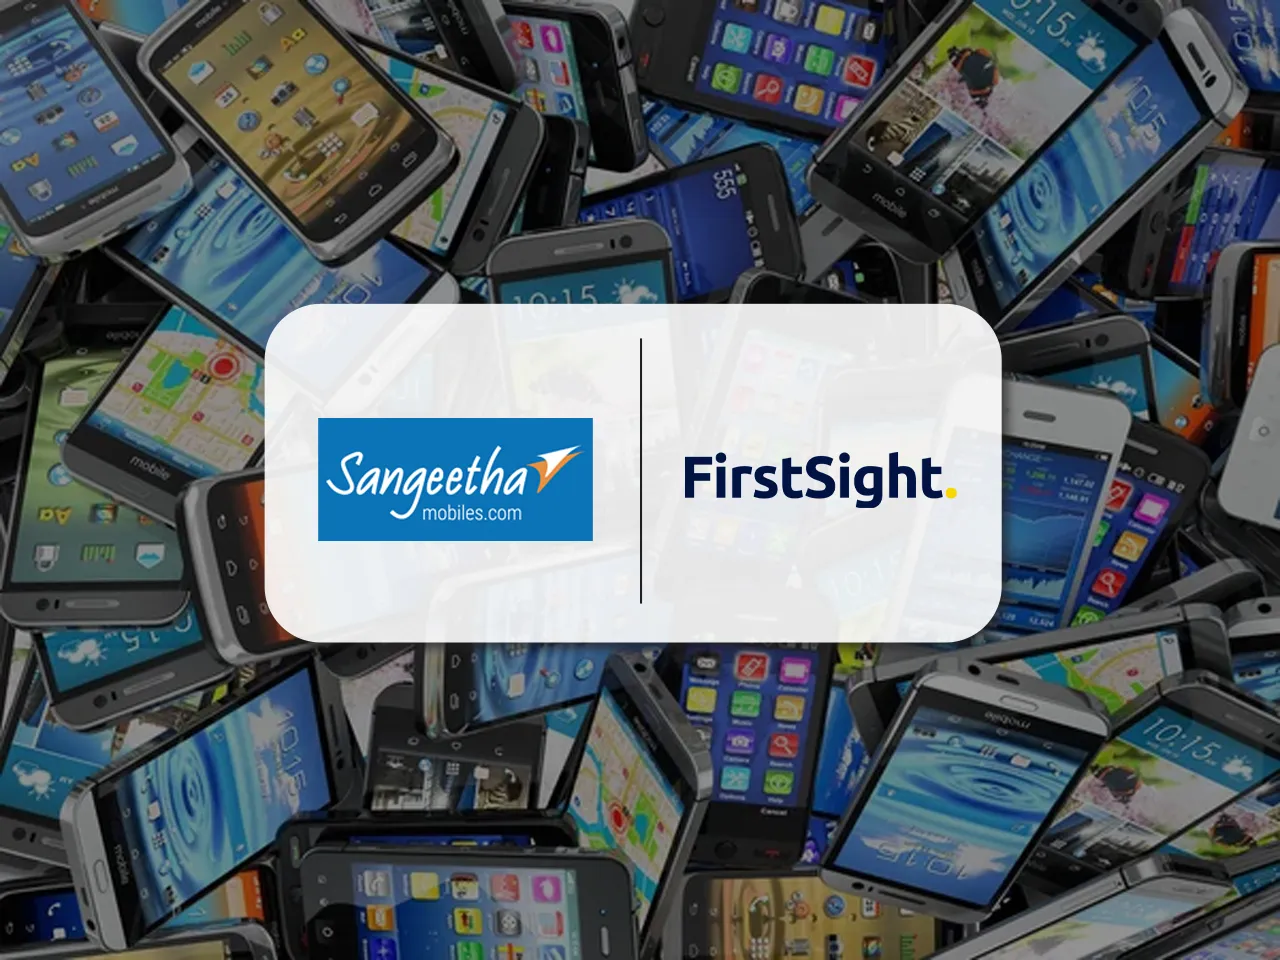 First Sight bags the digital mandate for Sangeetha Mobile